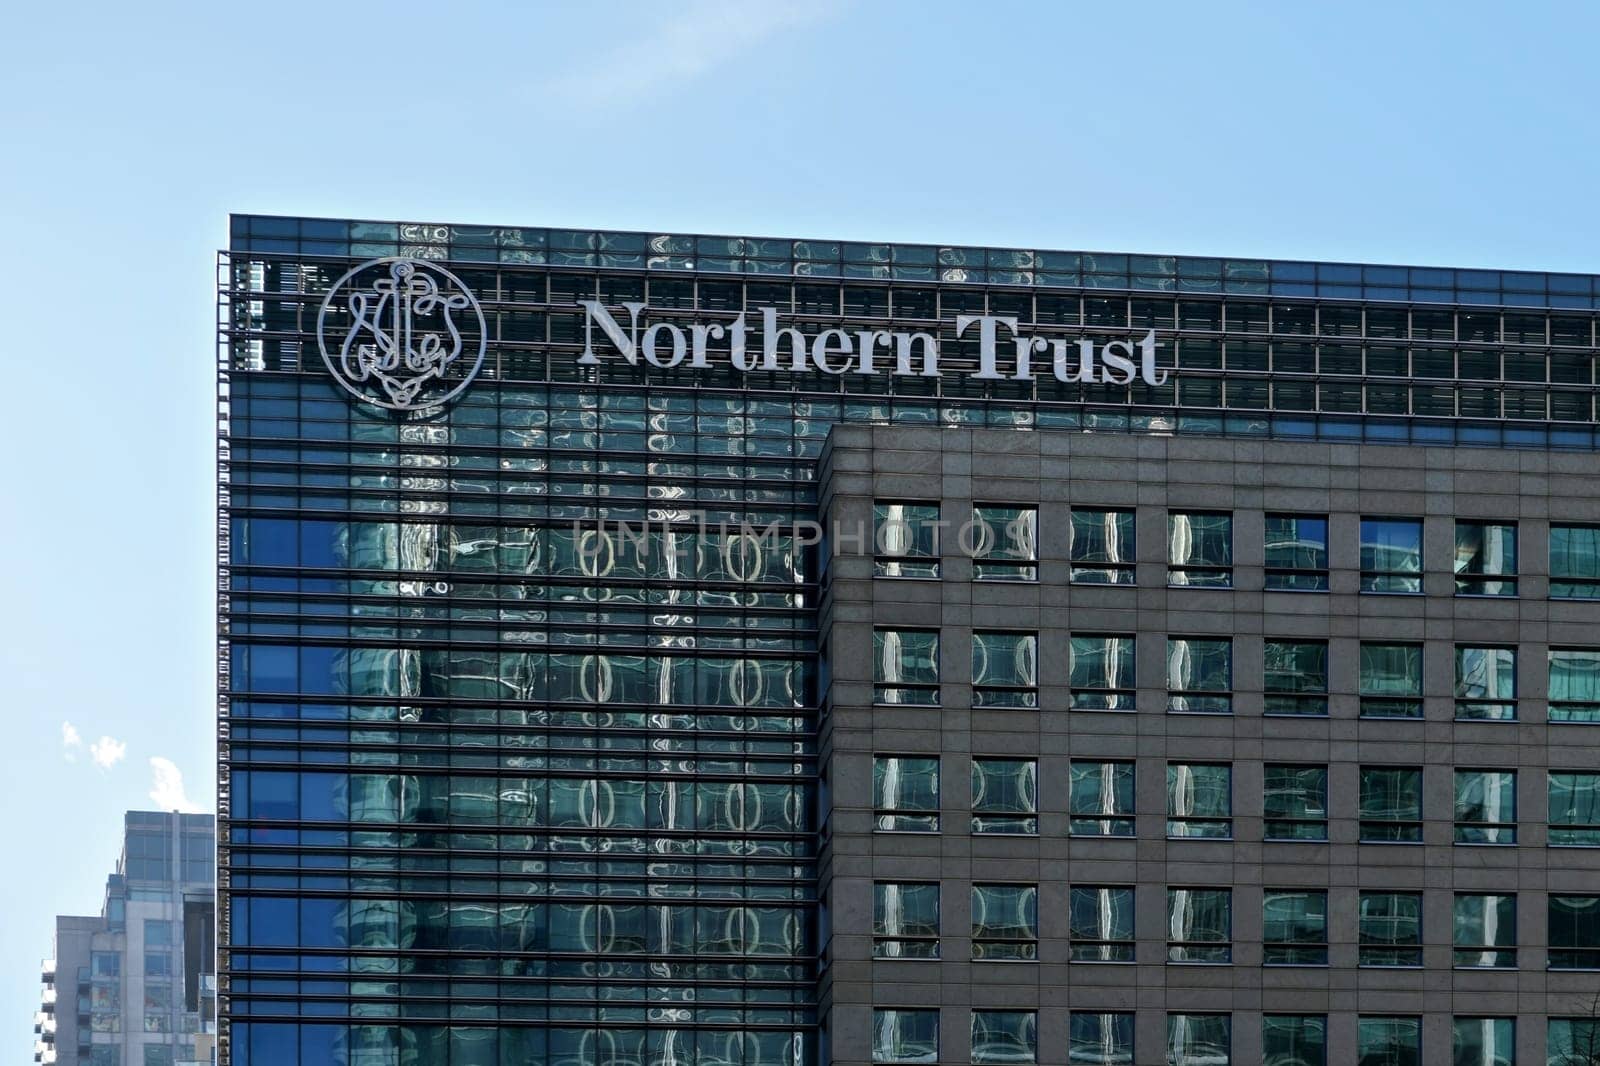 London, United Kingdom - February 03, 2019: Northern Trust UK branch offices at Canary Wharf. NT corporation is financial services company founded in 1889